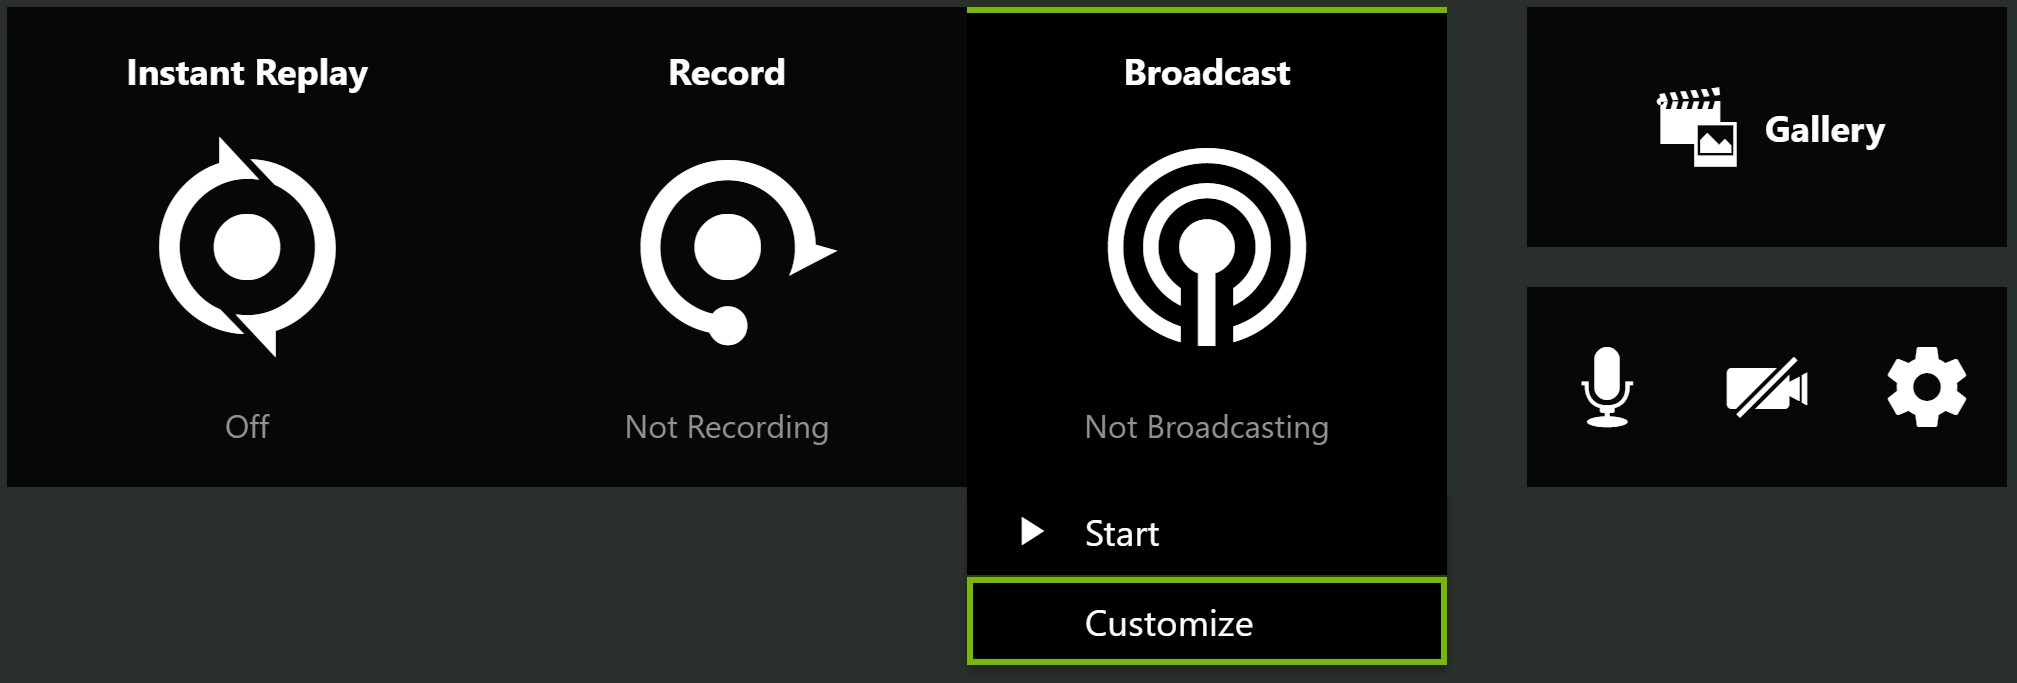 geforce how to stream with obs on twitch